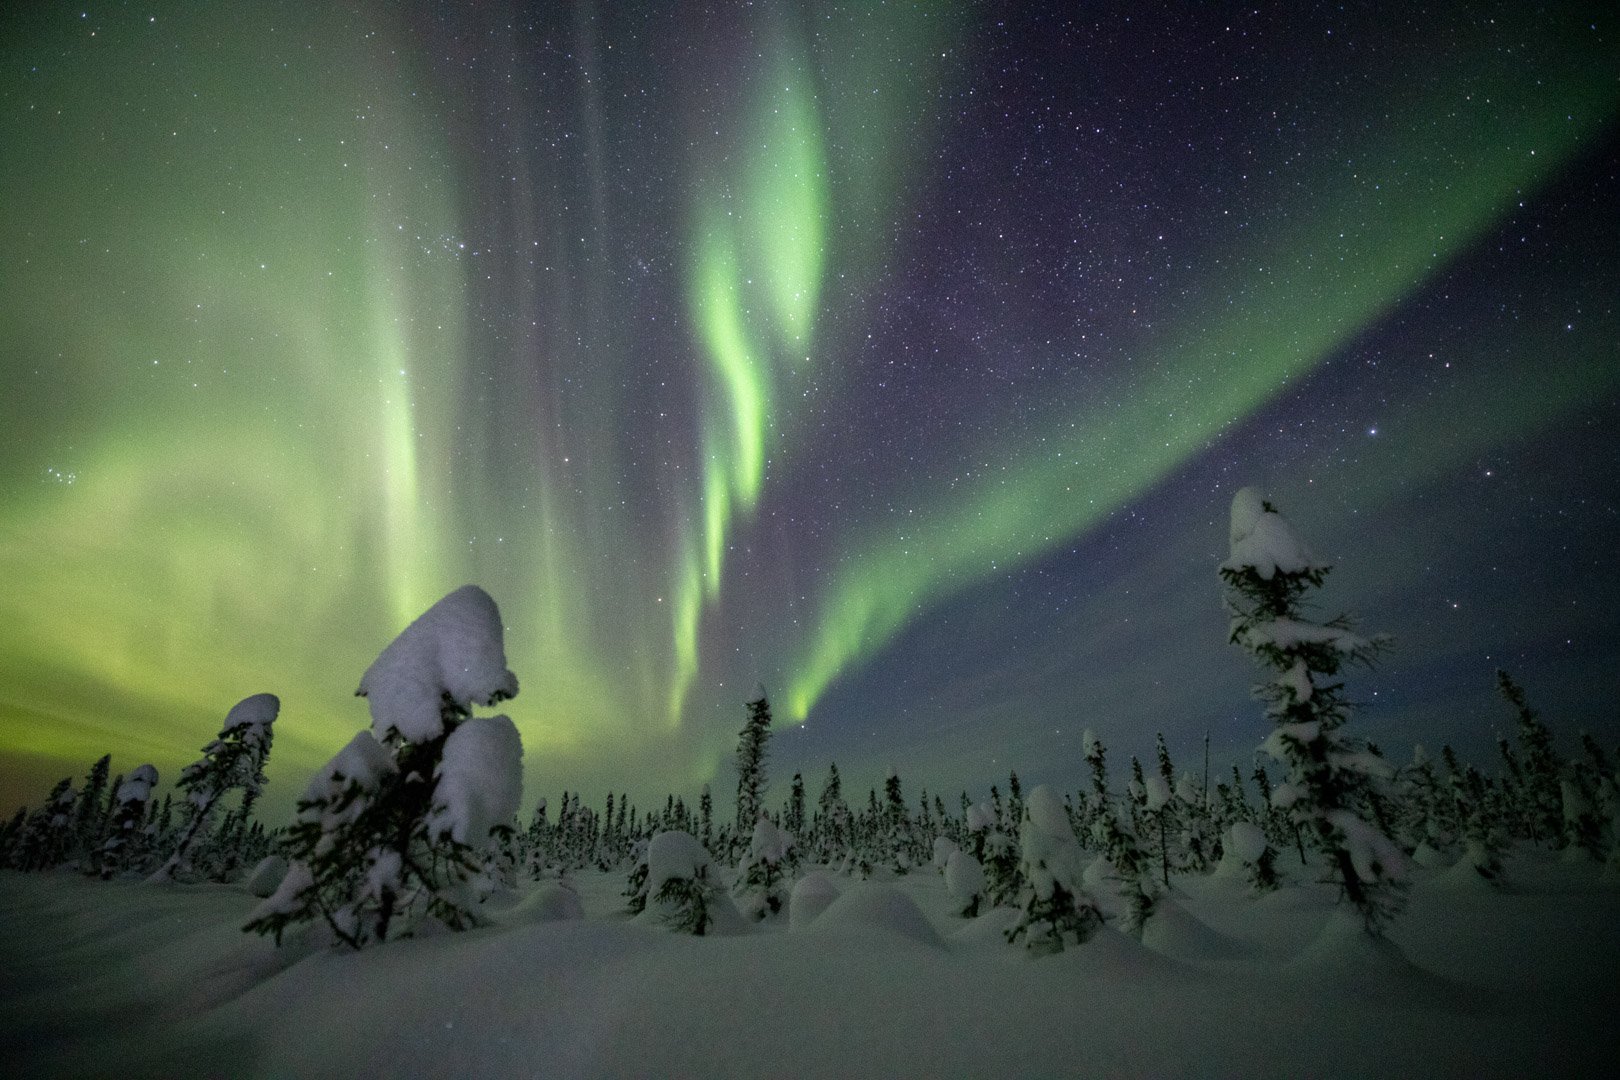  In Native Alaskan culture, it is said the lights will come down and take you away if you whistle or draw attention to yourself. The Aurora borealis ripples over the taiga almost every night during the winter in northern Alaska.  